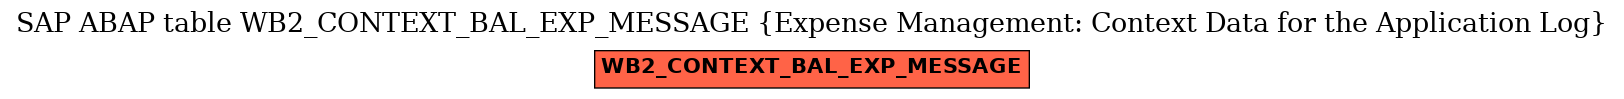 E-R Diagram for table WB2_CONTEXT_BAL_EXP_MESSAGE (Expense Management: Context Data for the Application Log)